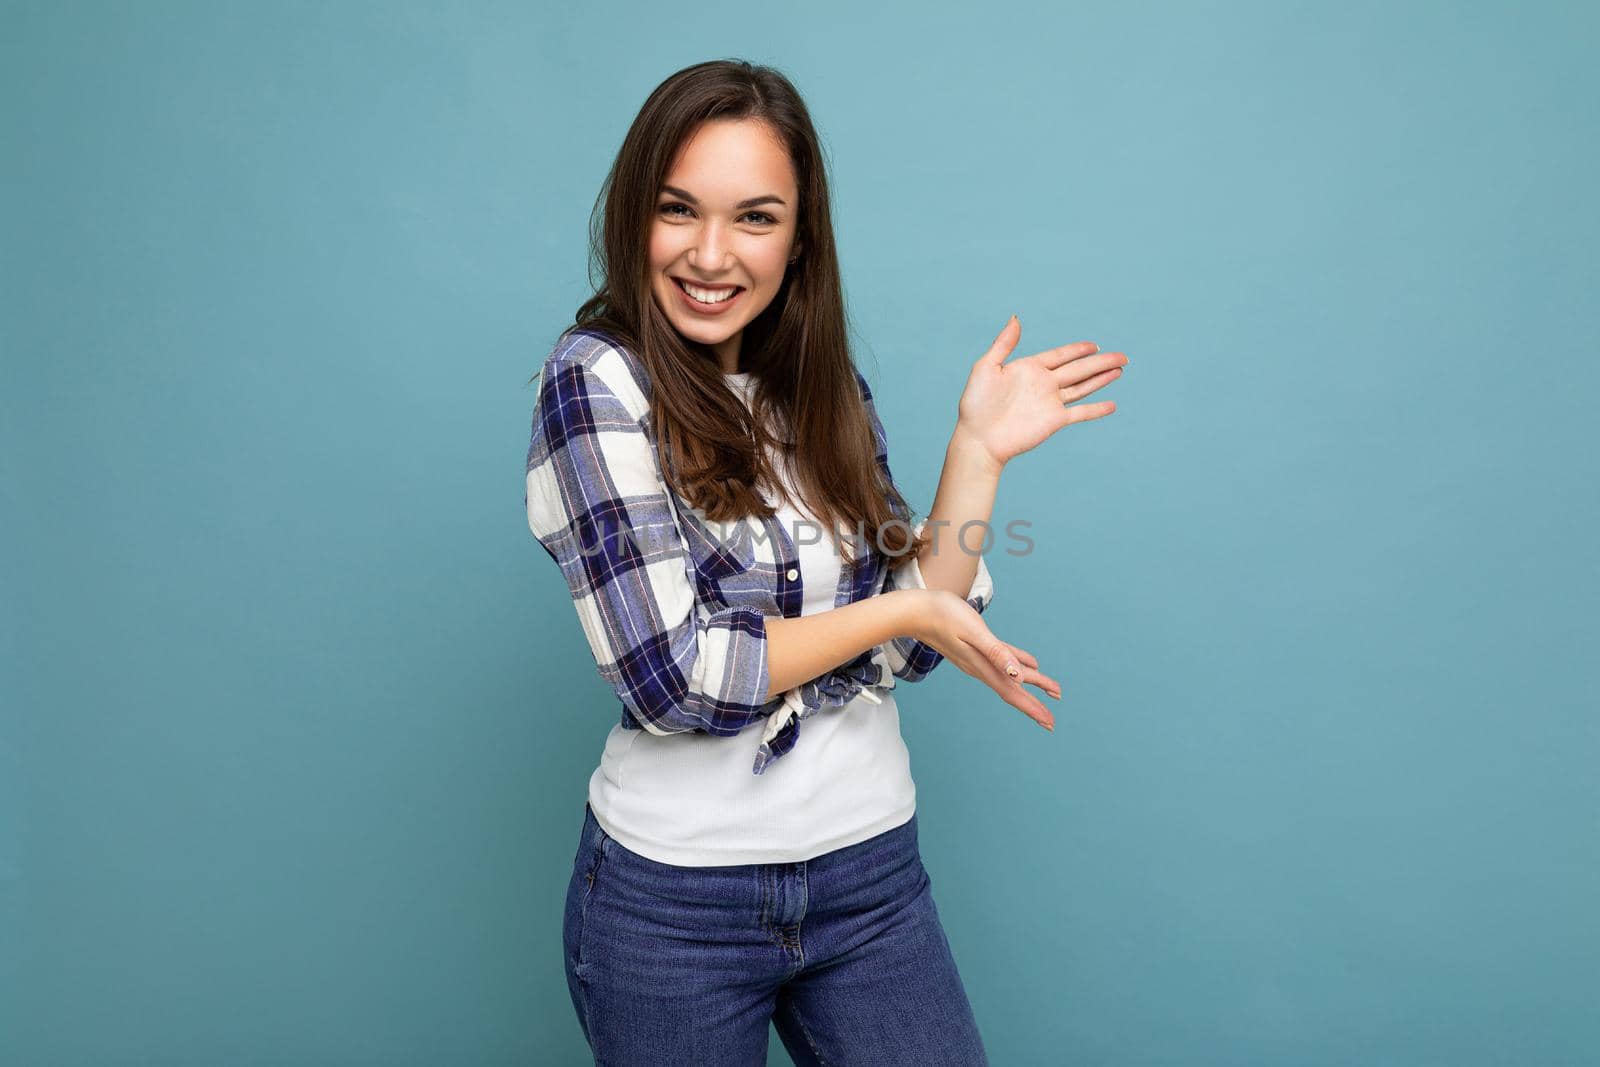 Close up photo of positive happy amazing cute nice charming young woman holding hands and showing advertisement wearing casual clothes isolated over background with copy space by TRMK